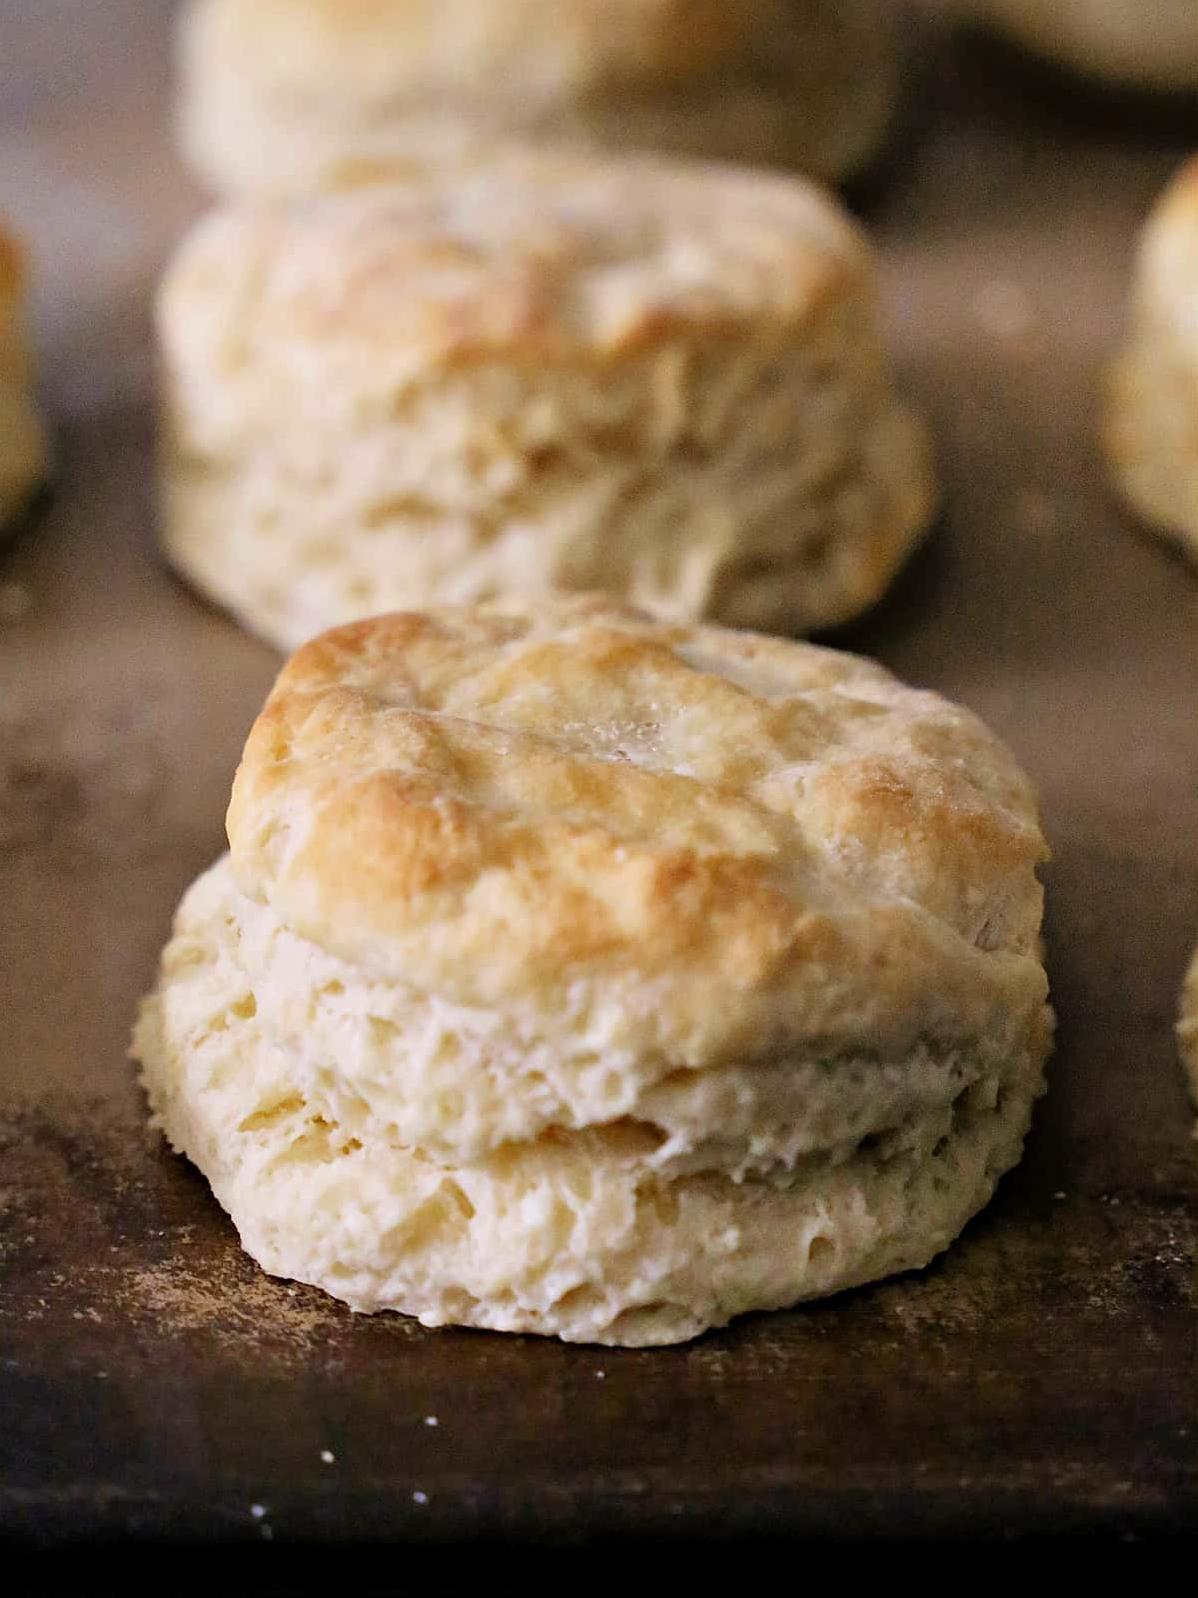  Buttermilk biscuits that will melt in your mouth